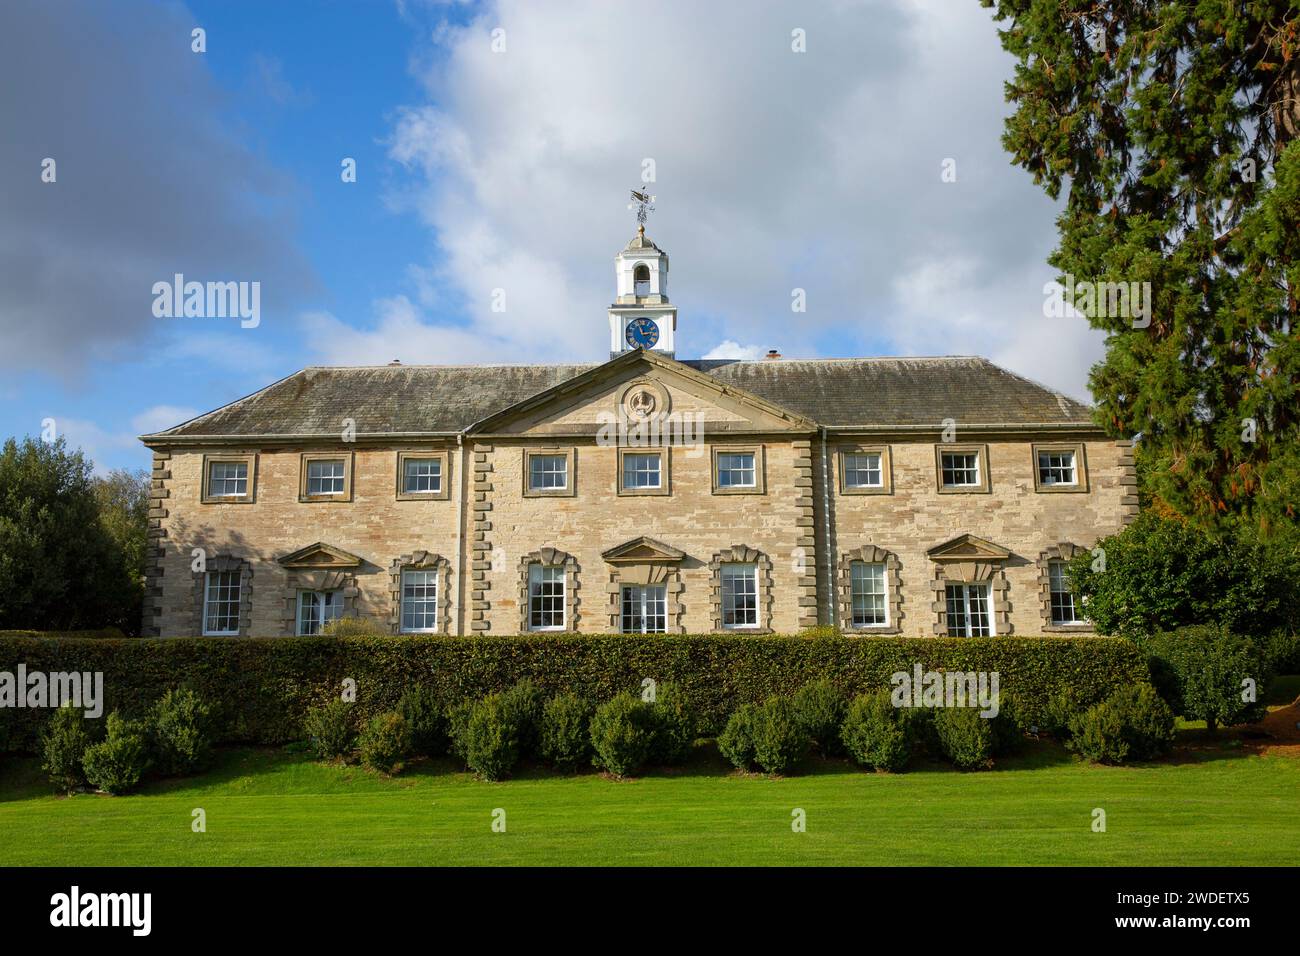 The Stables at Compton Verney House, an 18th-century country mansion at Compton Verney near Kineton in Warwickshire, England. Stock Photo